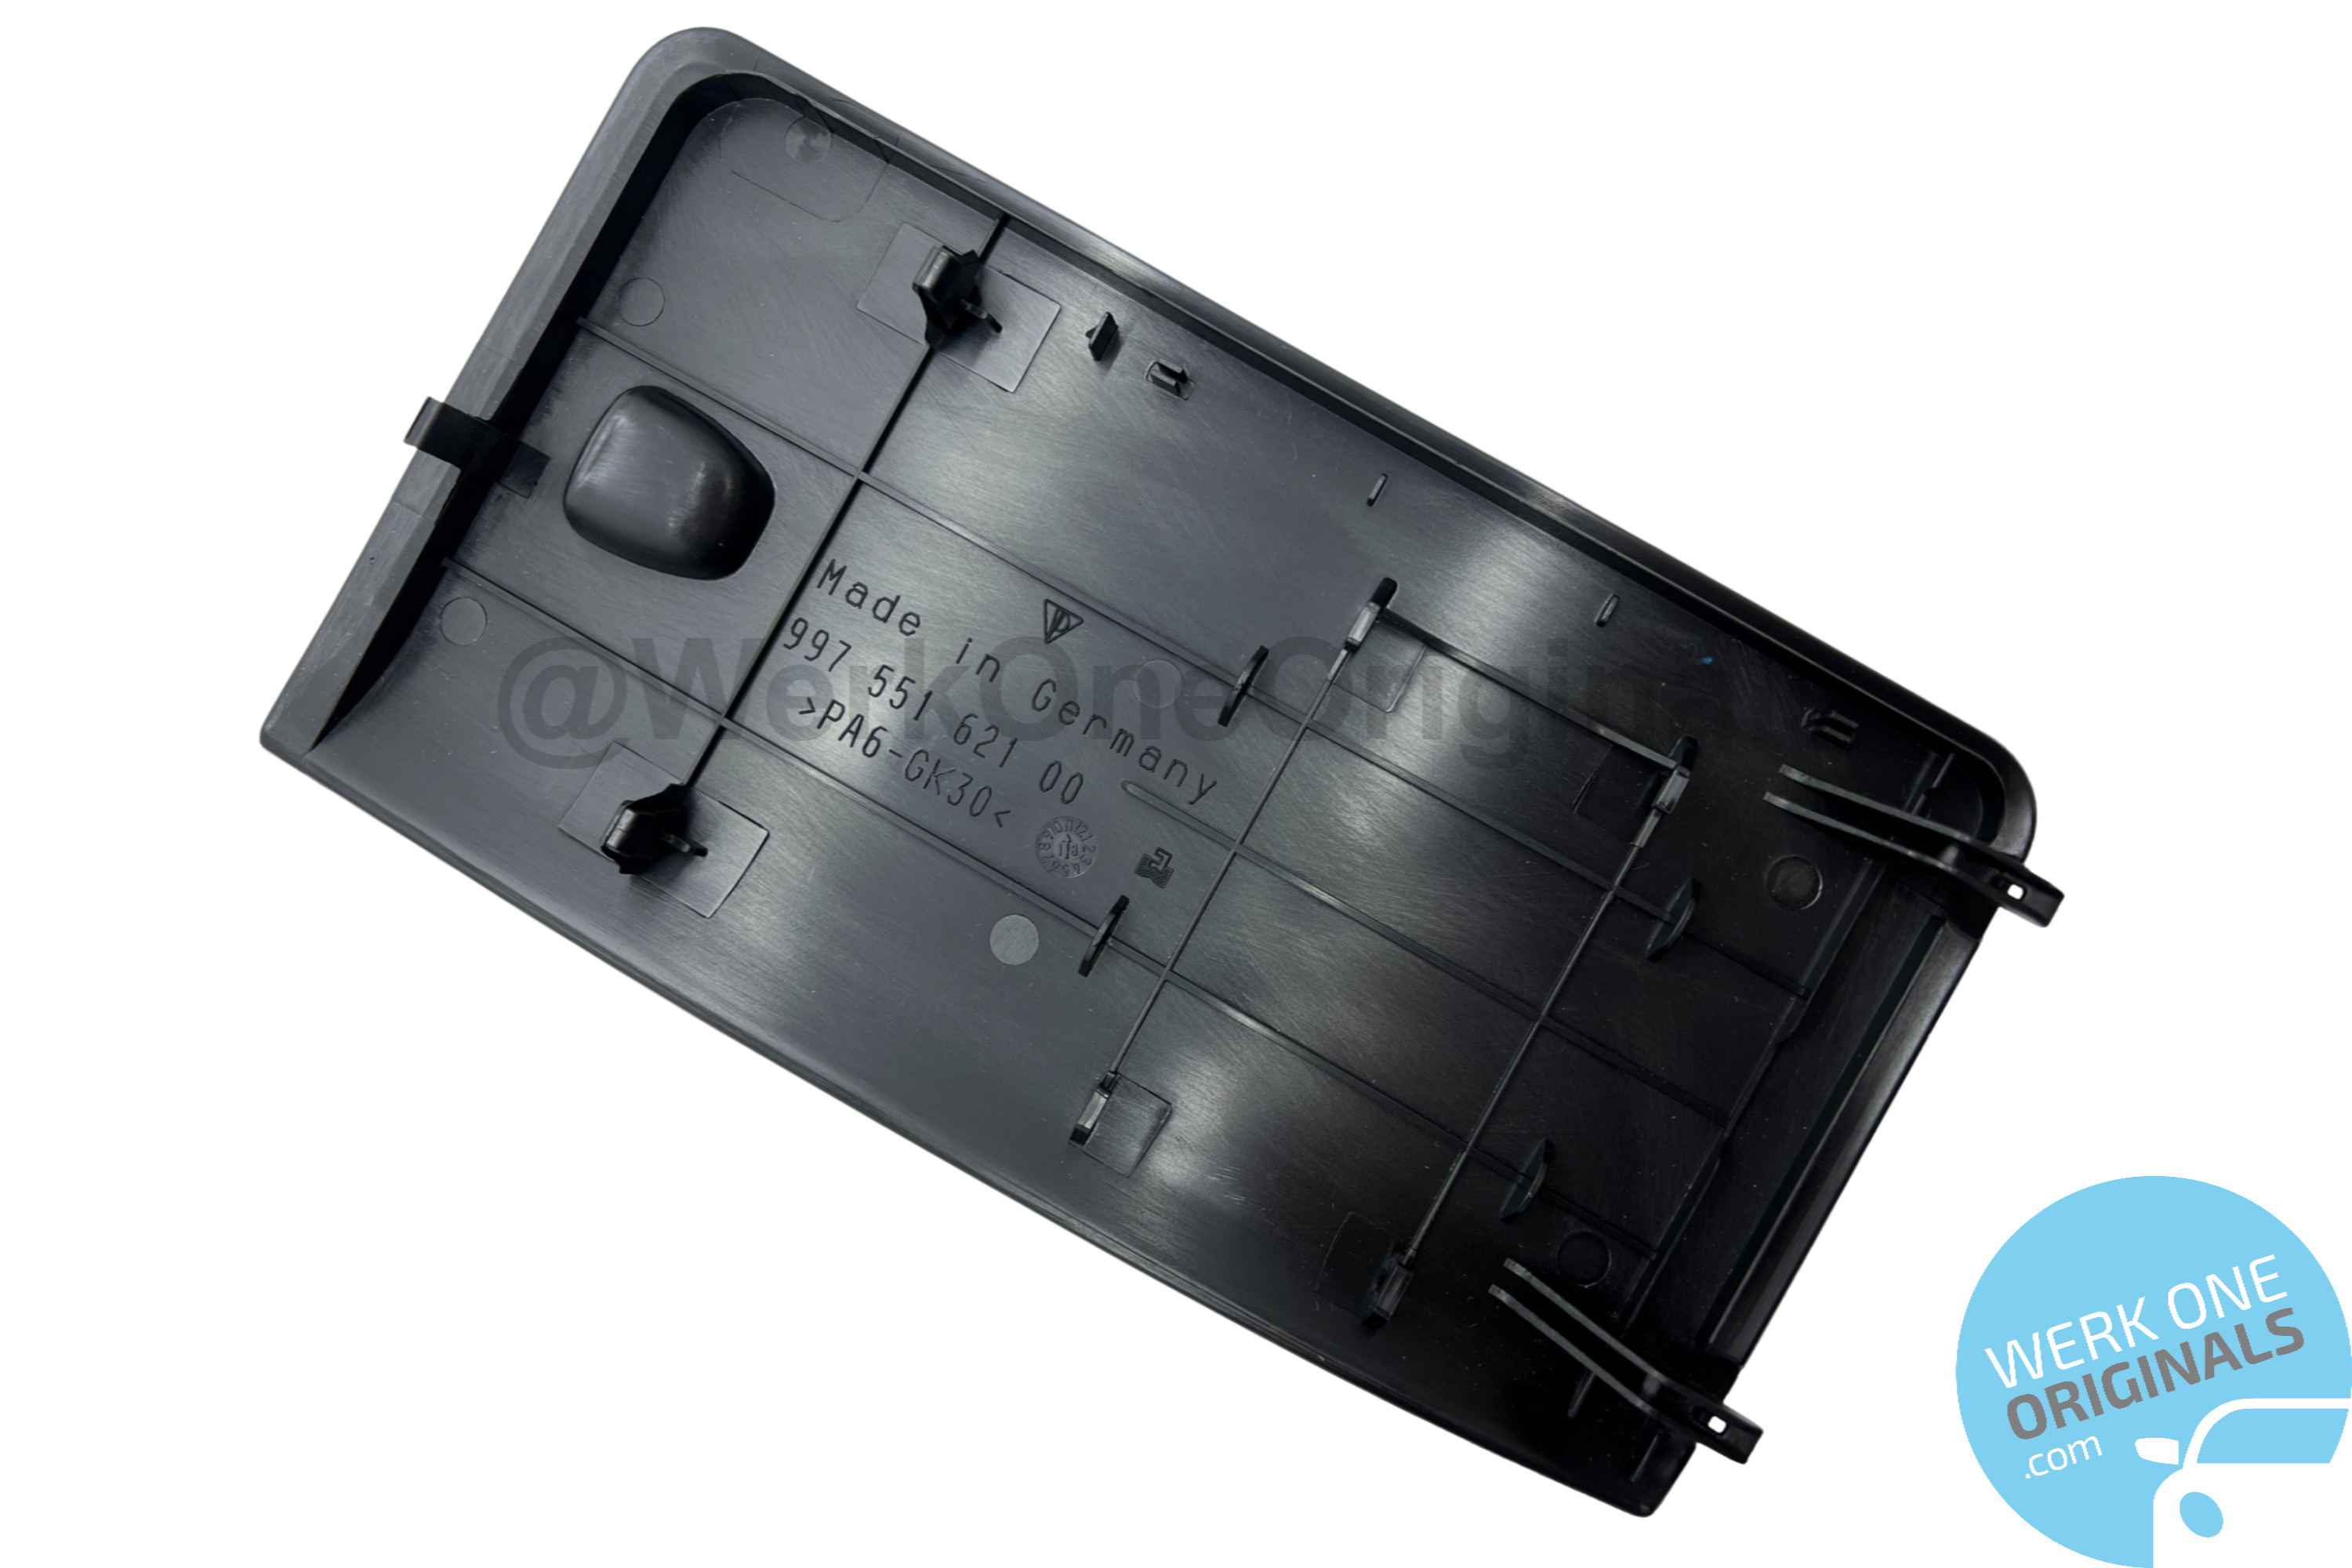 Porsche Fuse Box Lid Cover for 911 Type 997 LHD Models!